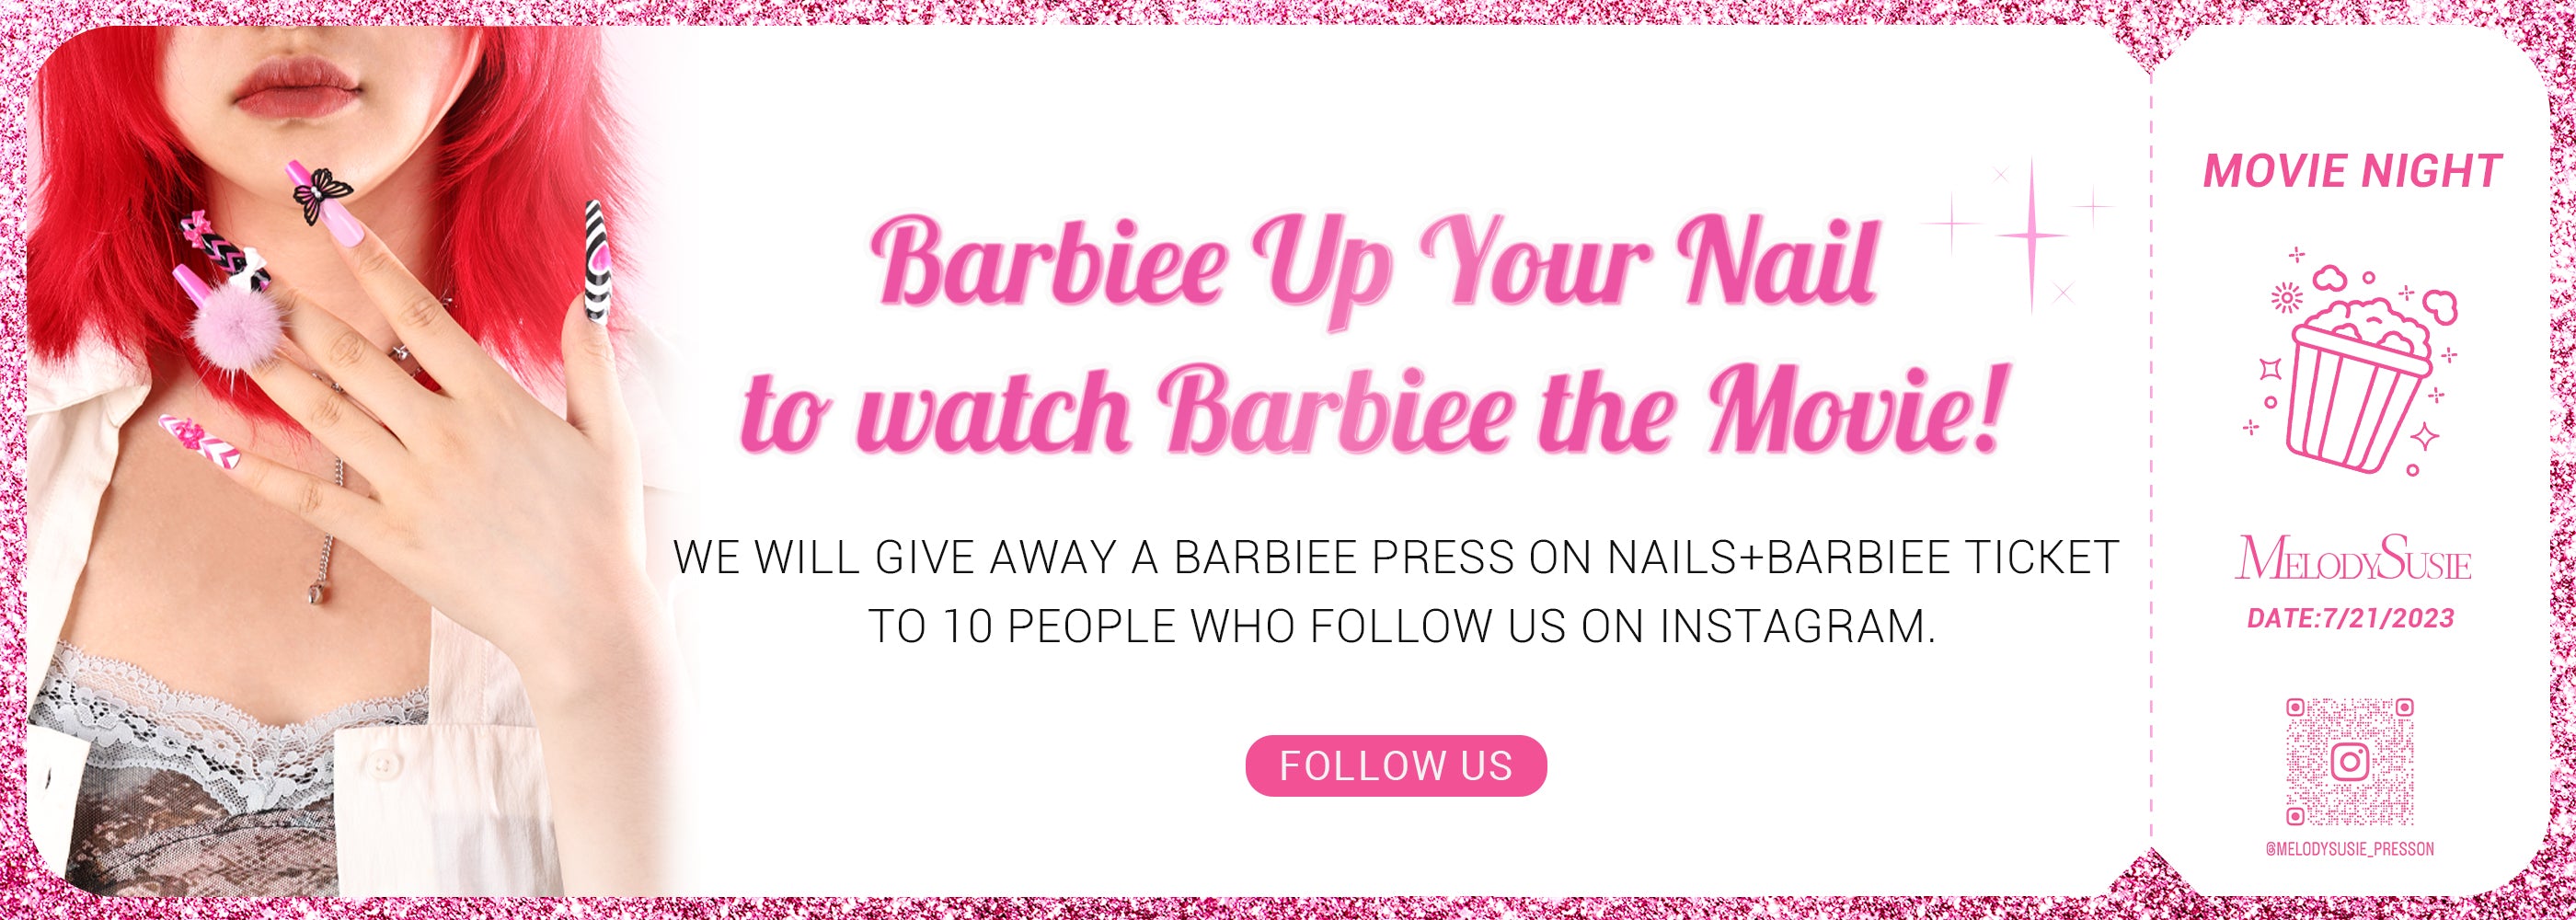 Barbiee Up Your Nail to watch Barbiee the Movie | MelodySusie